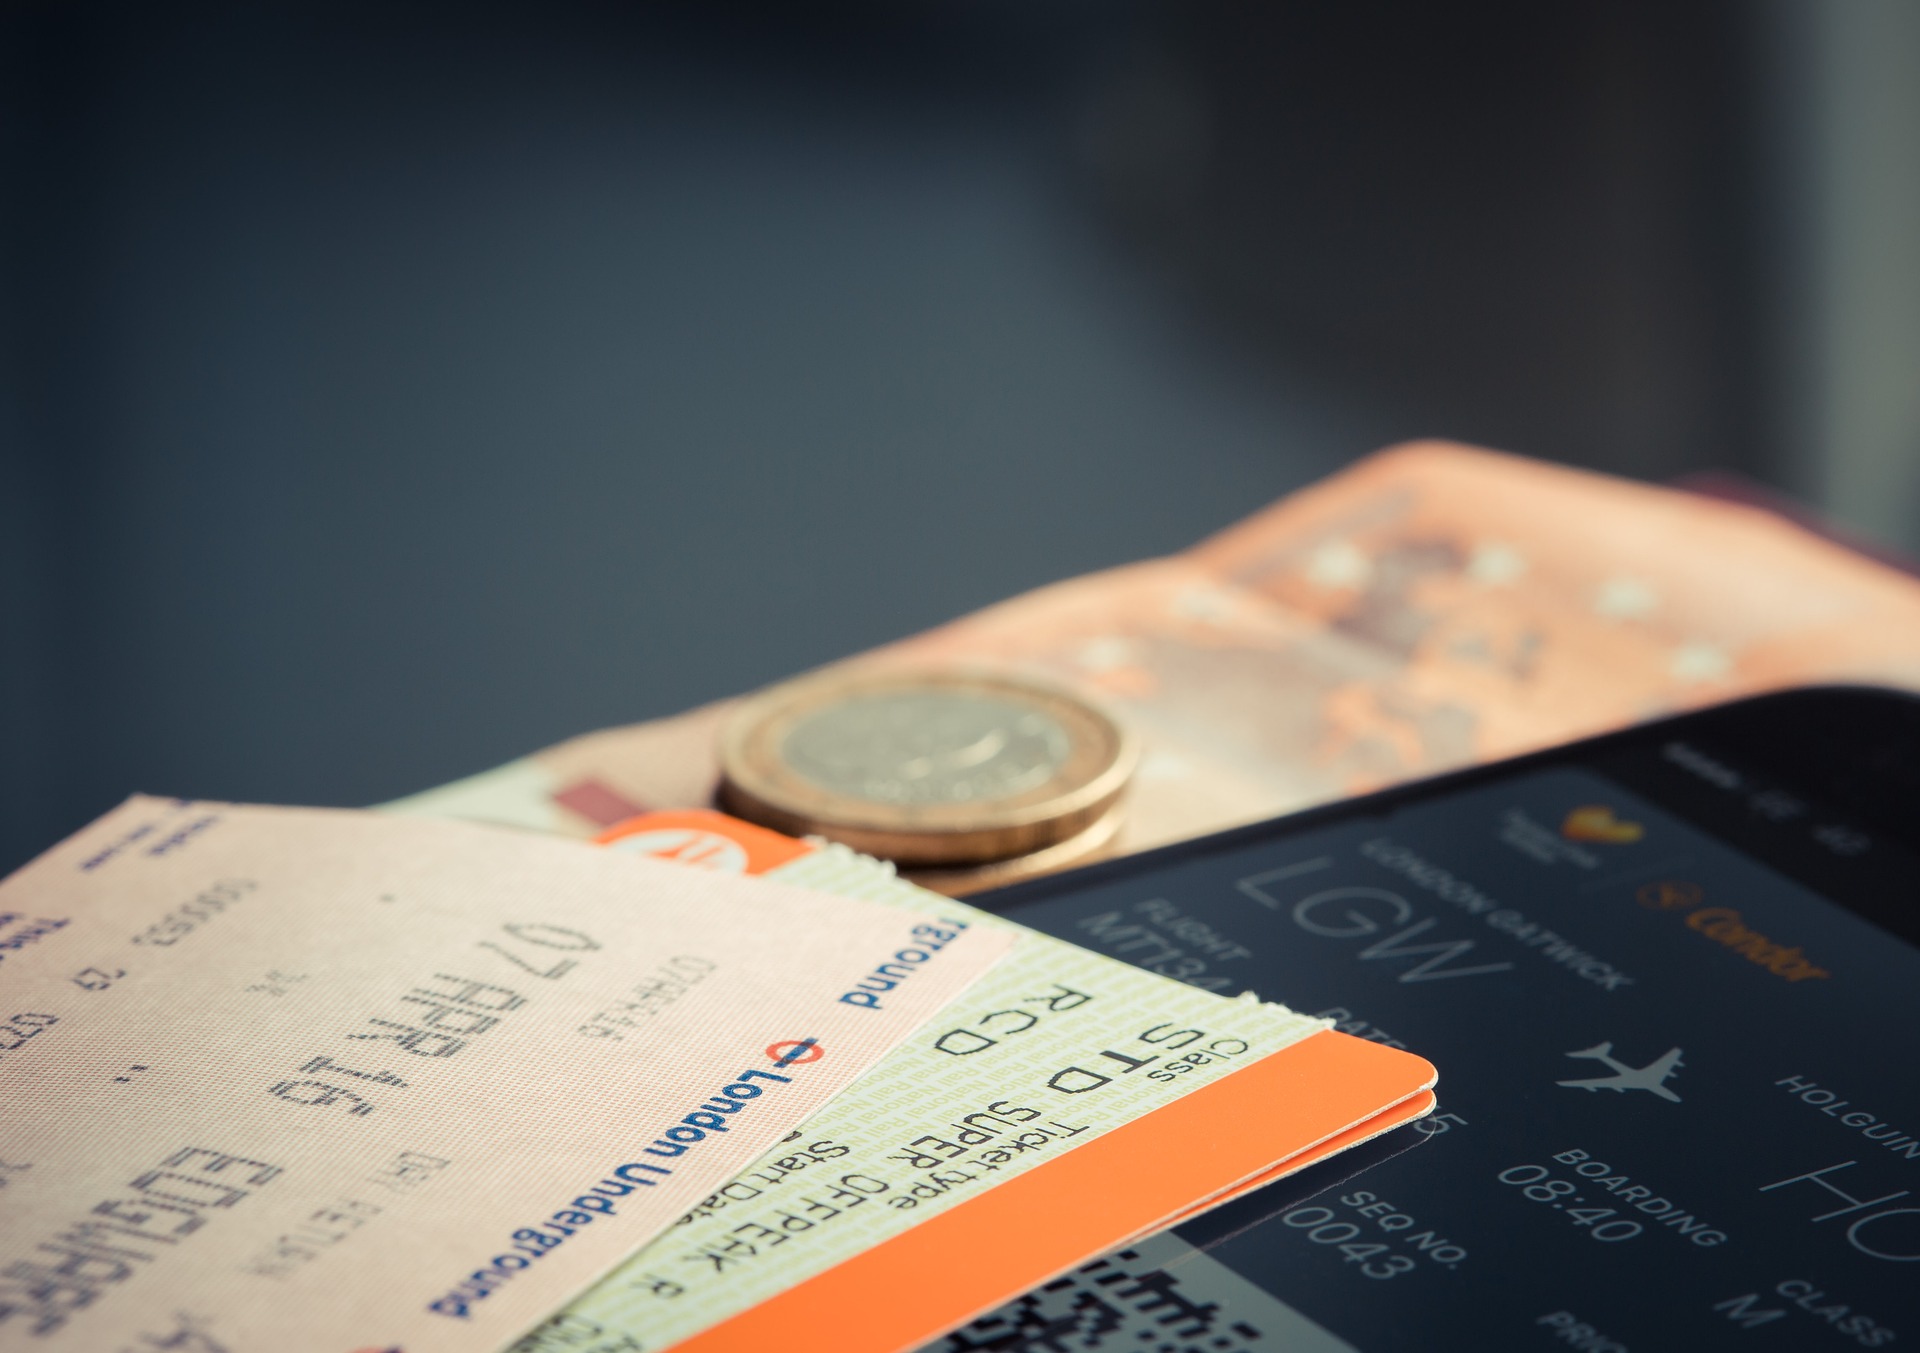 British railway reform: how can train companies use contactless ticketing to adopt pay-as-you-go fares? image